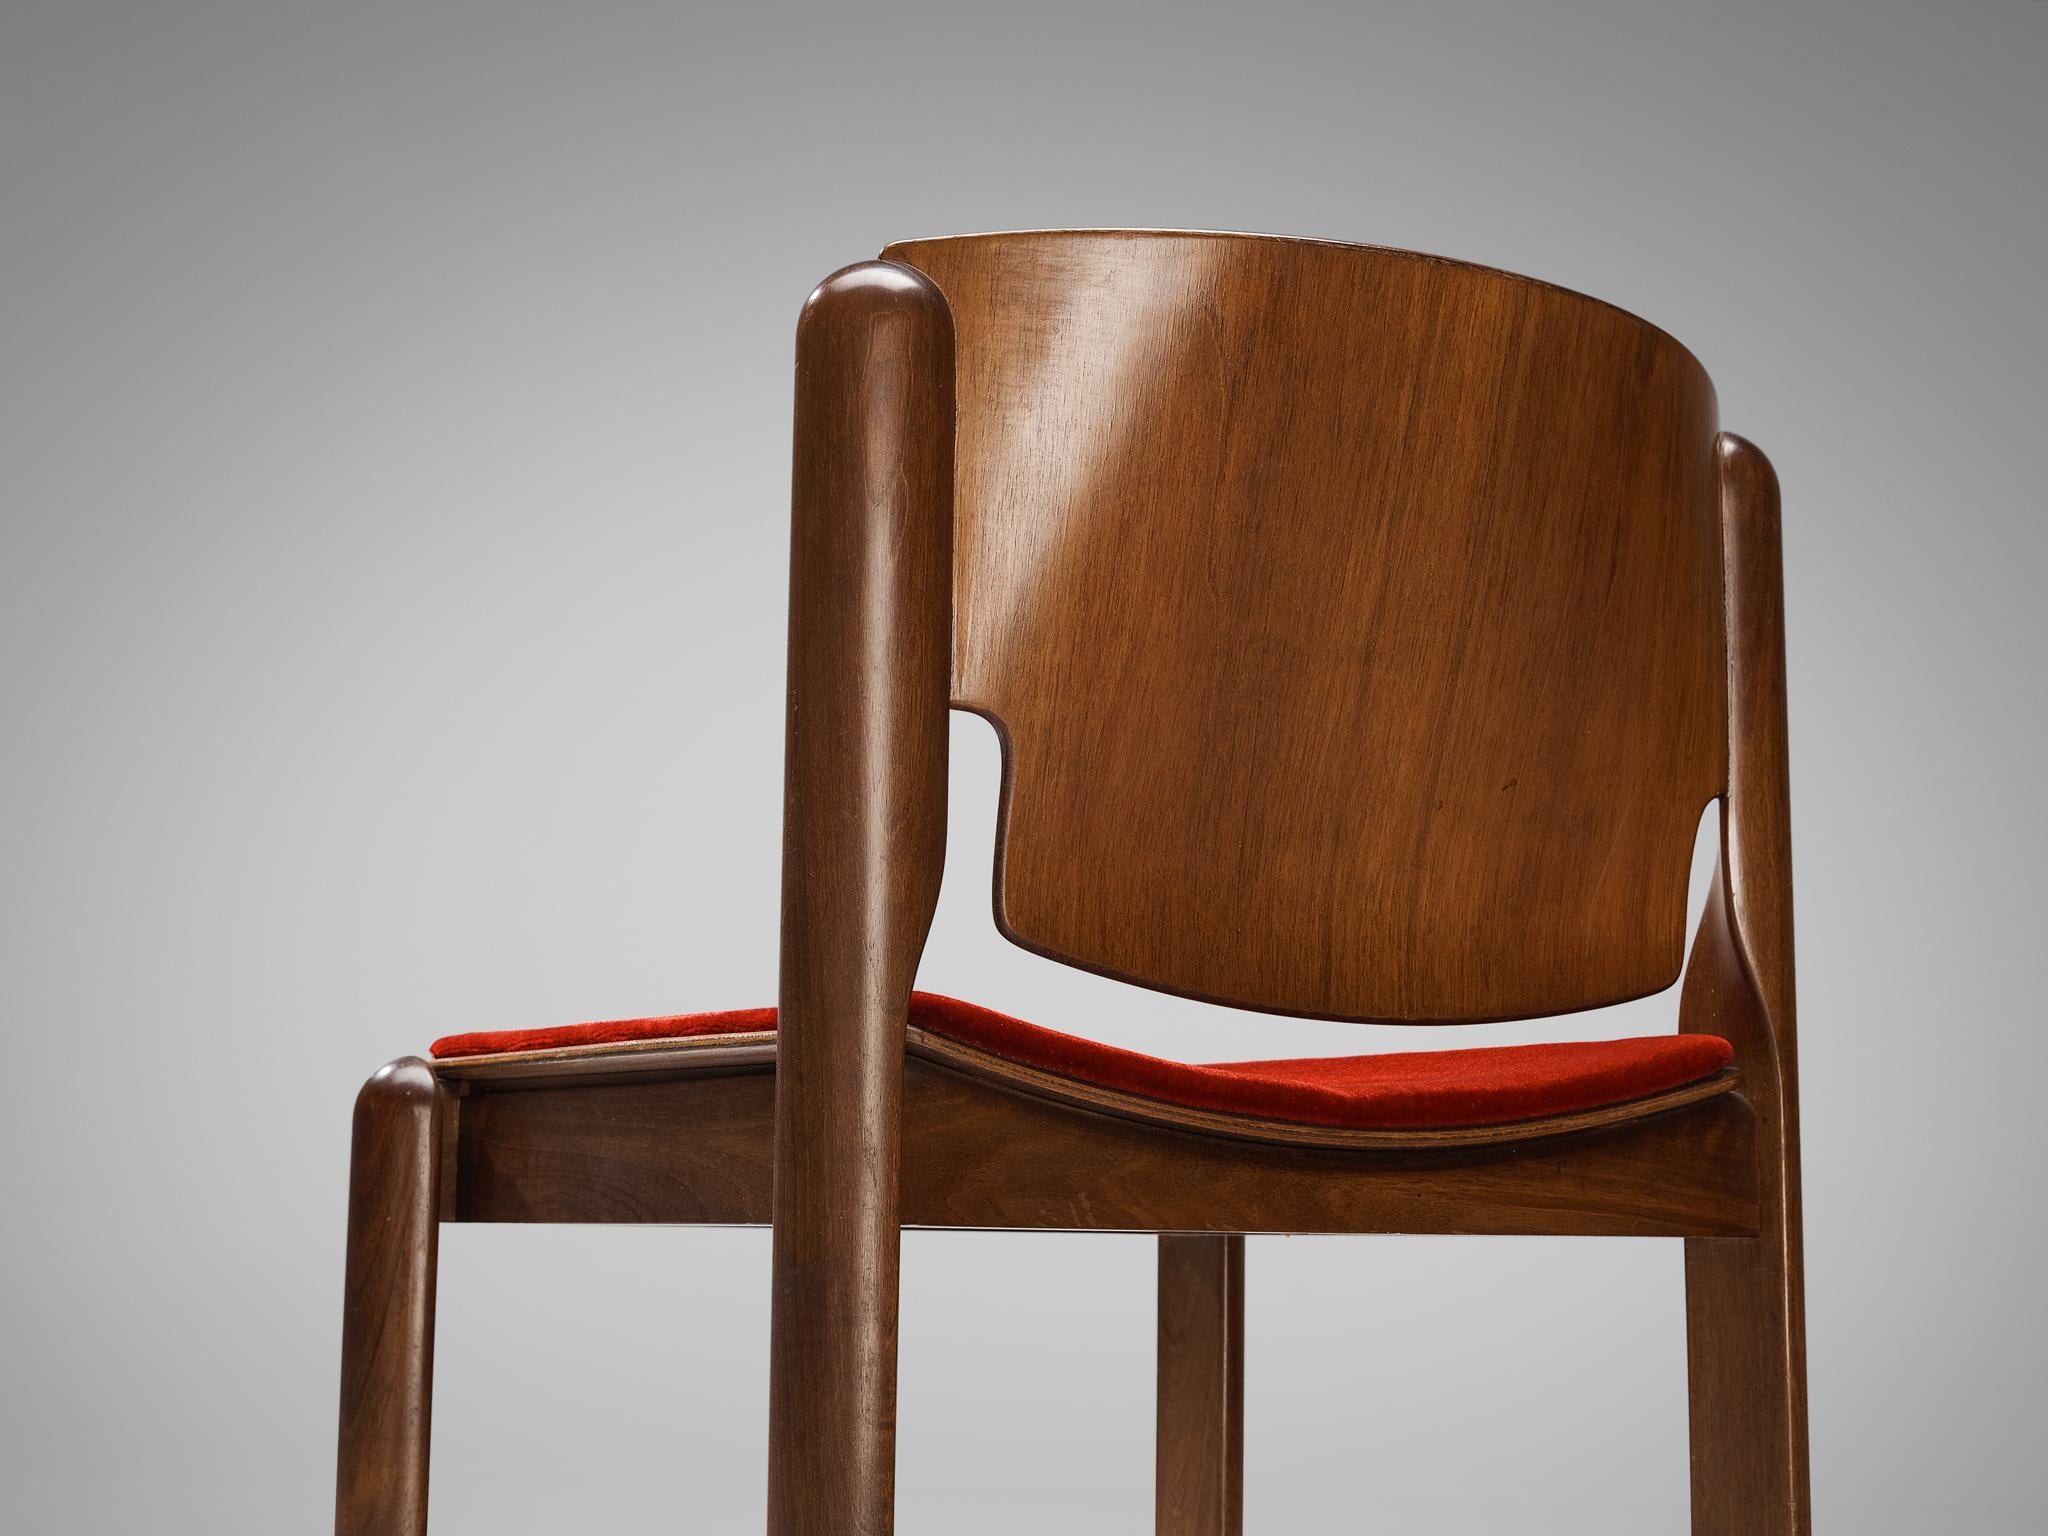 Vico Magistretti for Cassina Pair of Dining Chairs in Red Velvet and Walnut